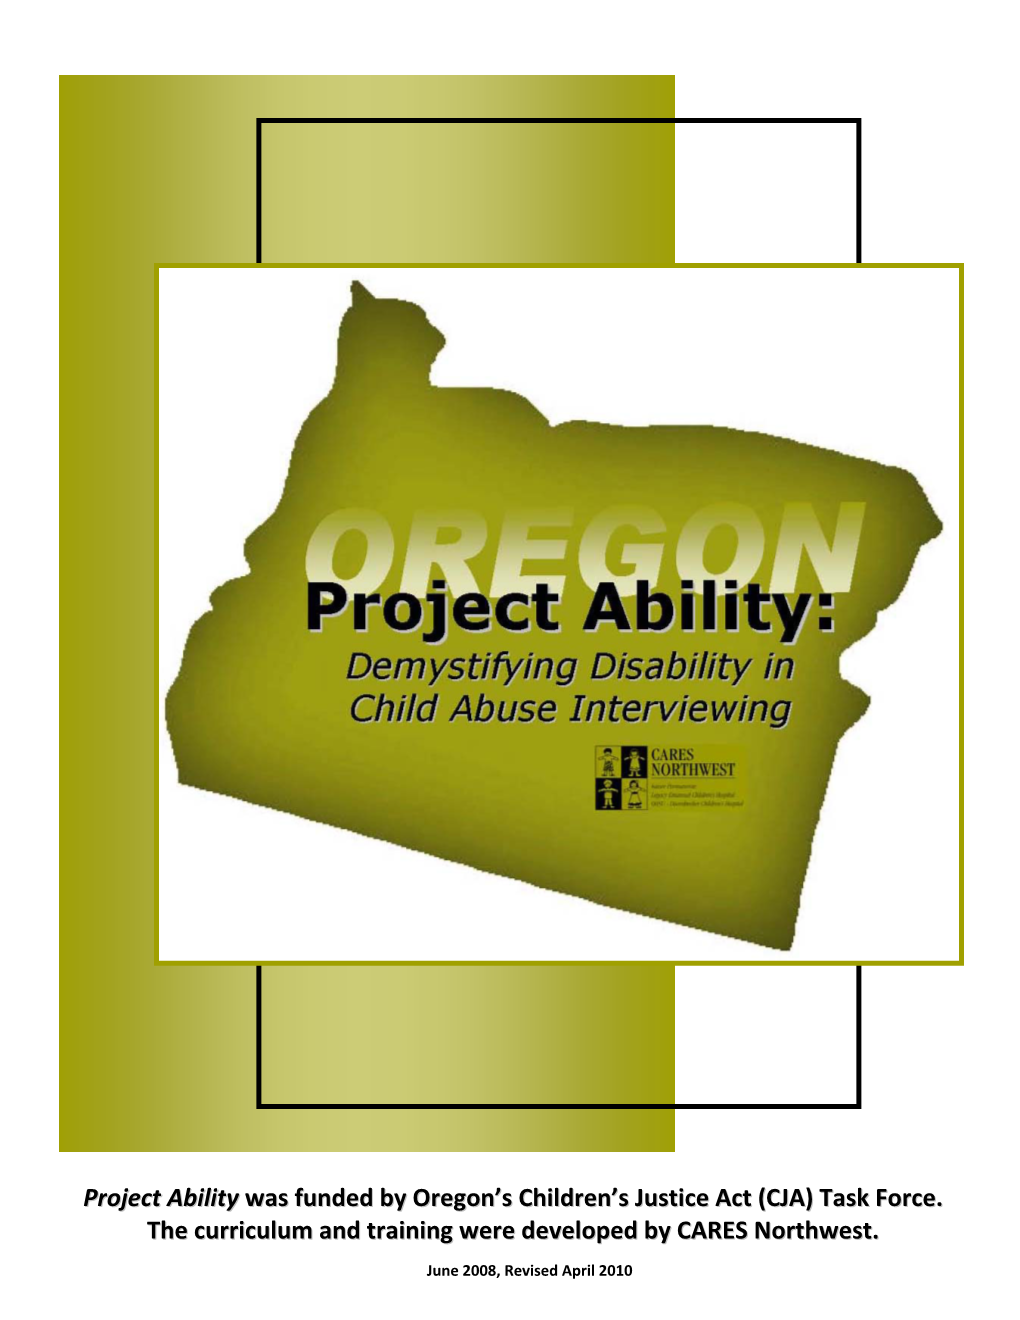 Project Ability Was Funded by Oregon's Children's Justice Act (CJA)